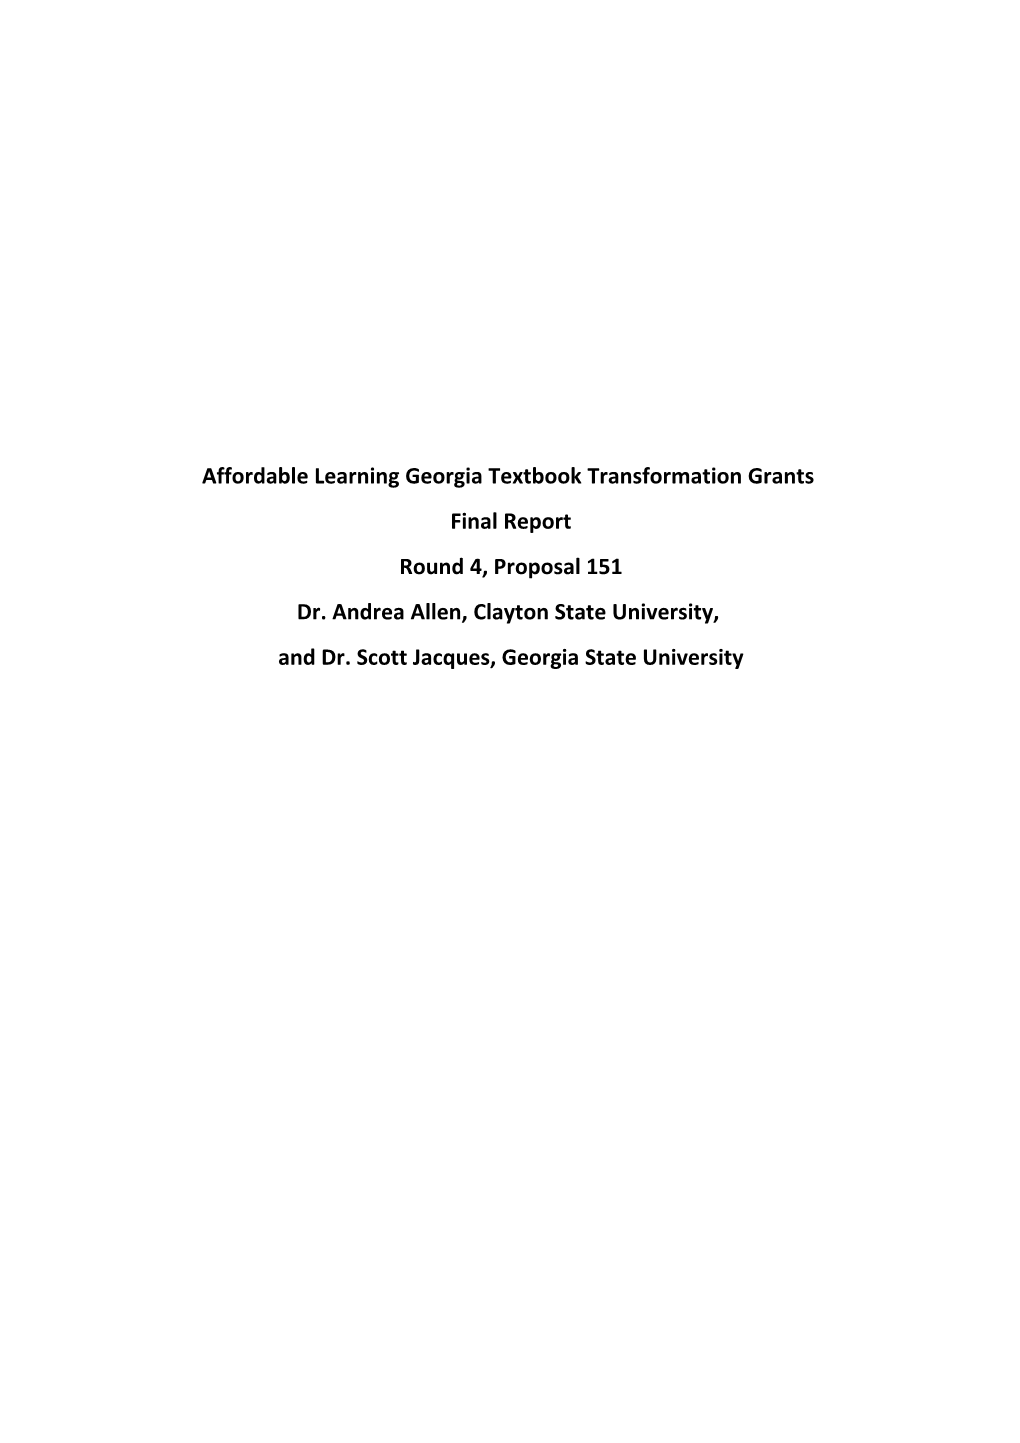 Affordable Learning Georgia Textbook Transformation Grants